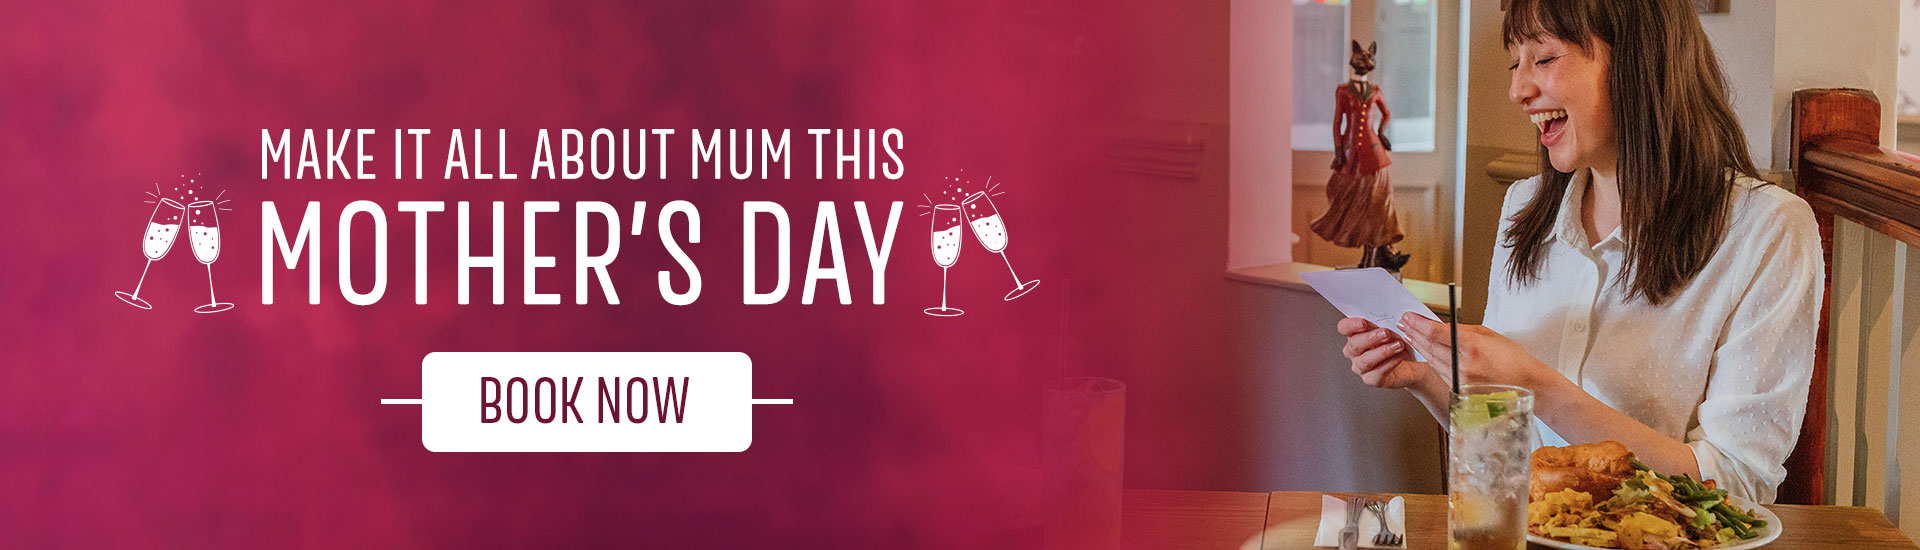 Mother’s Day Carvery in Newcastle-Upon-Tyne | Toby Carvery Kenton Bank